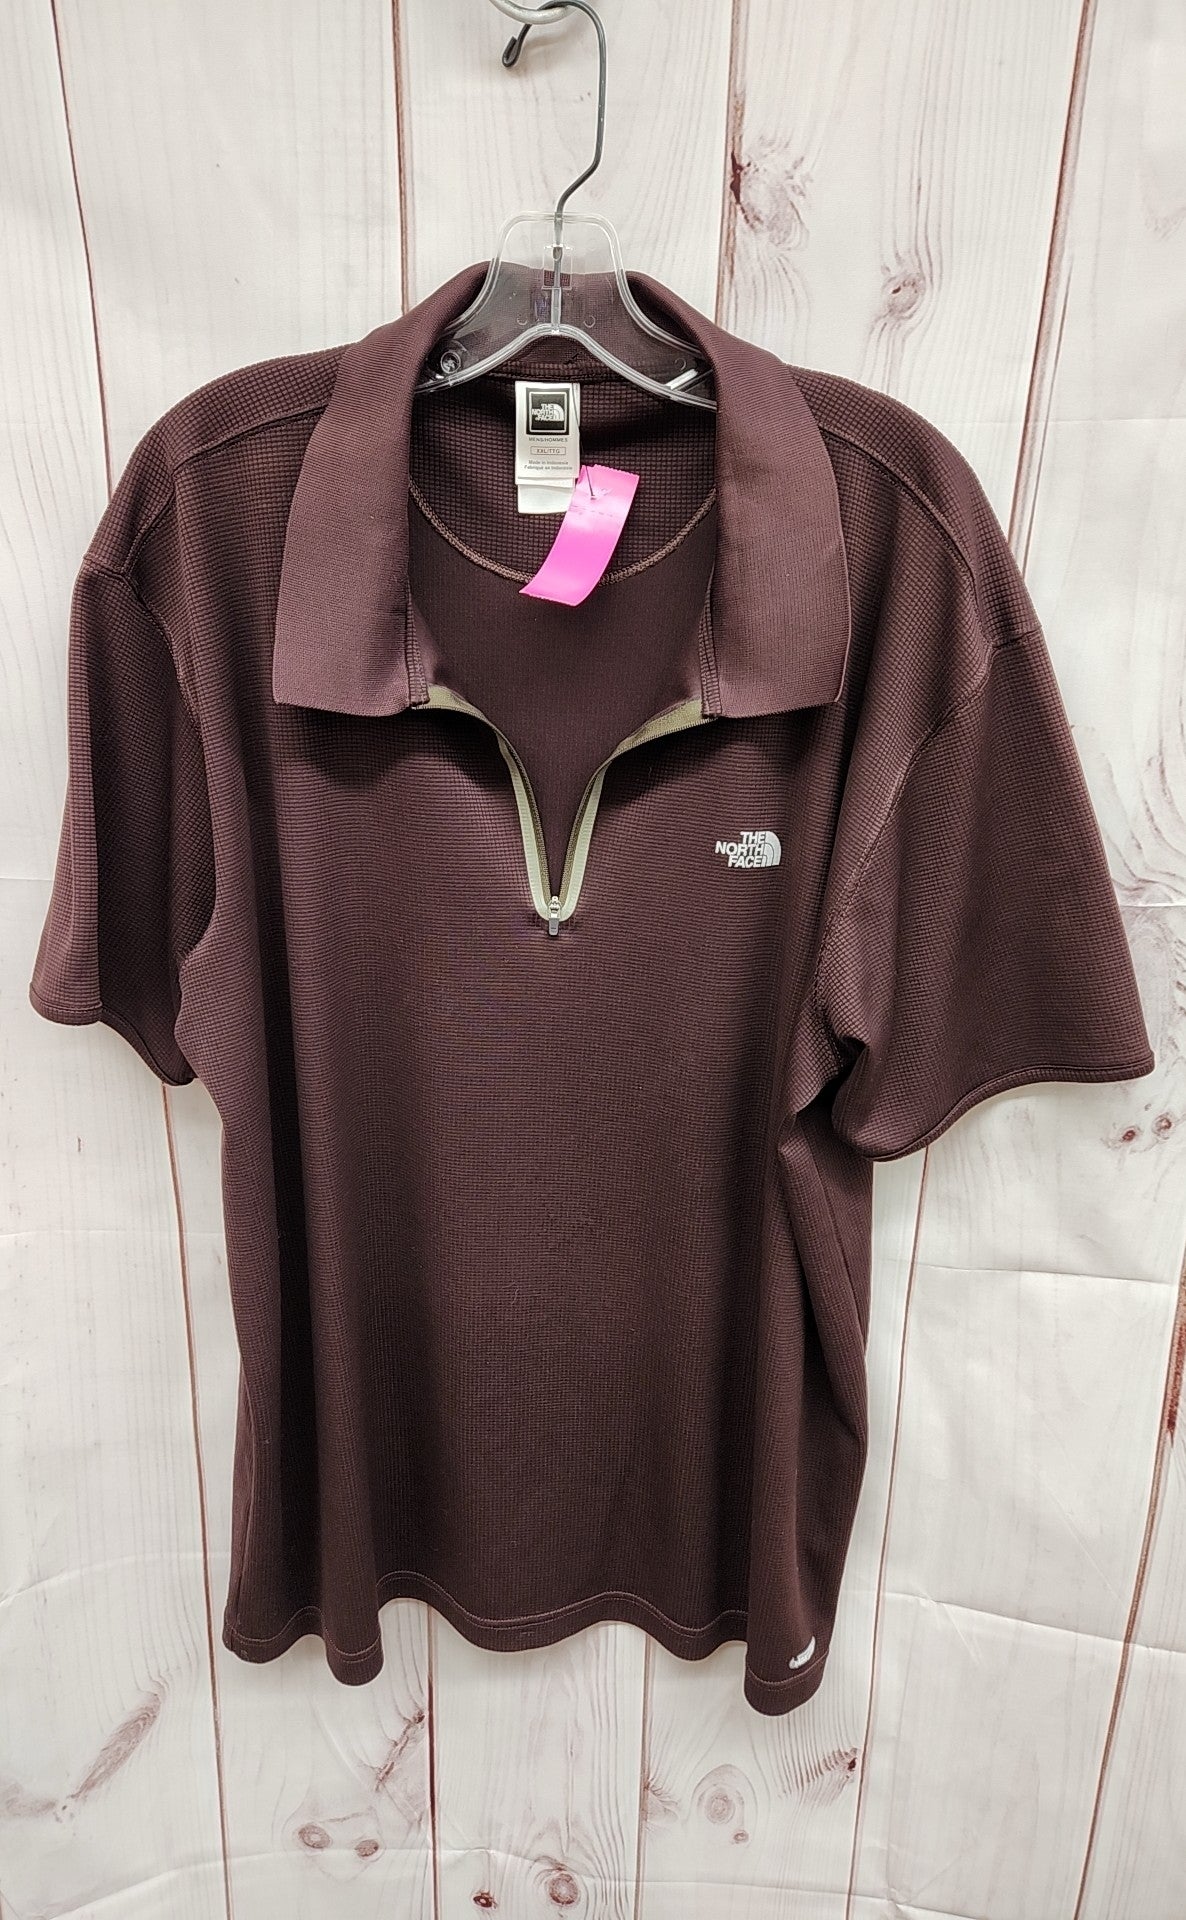 North Face Men's Size XXL Brown Shirt